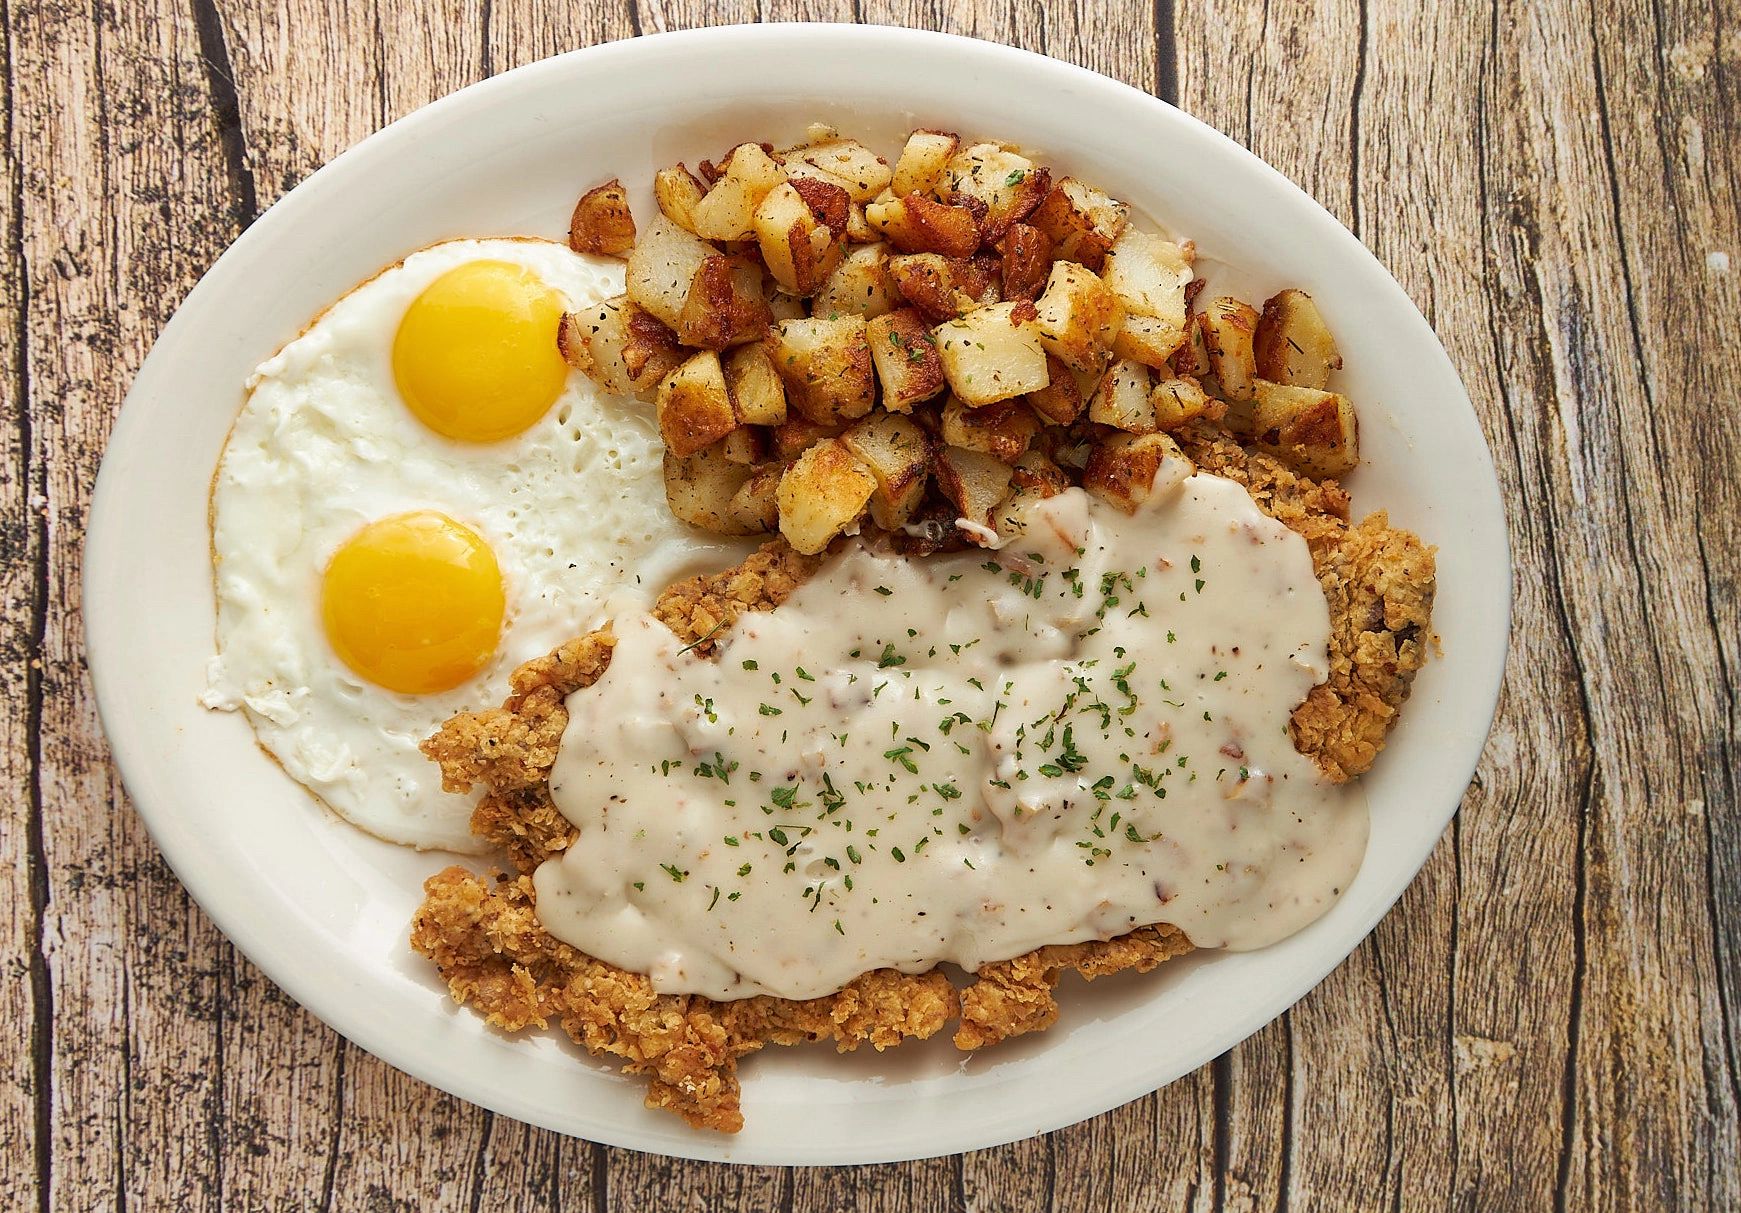 OUR DELICIOUS HOMEMADE COUNTRY FRIED STEAK